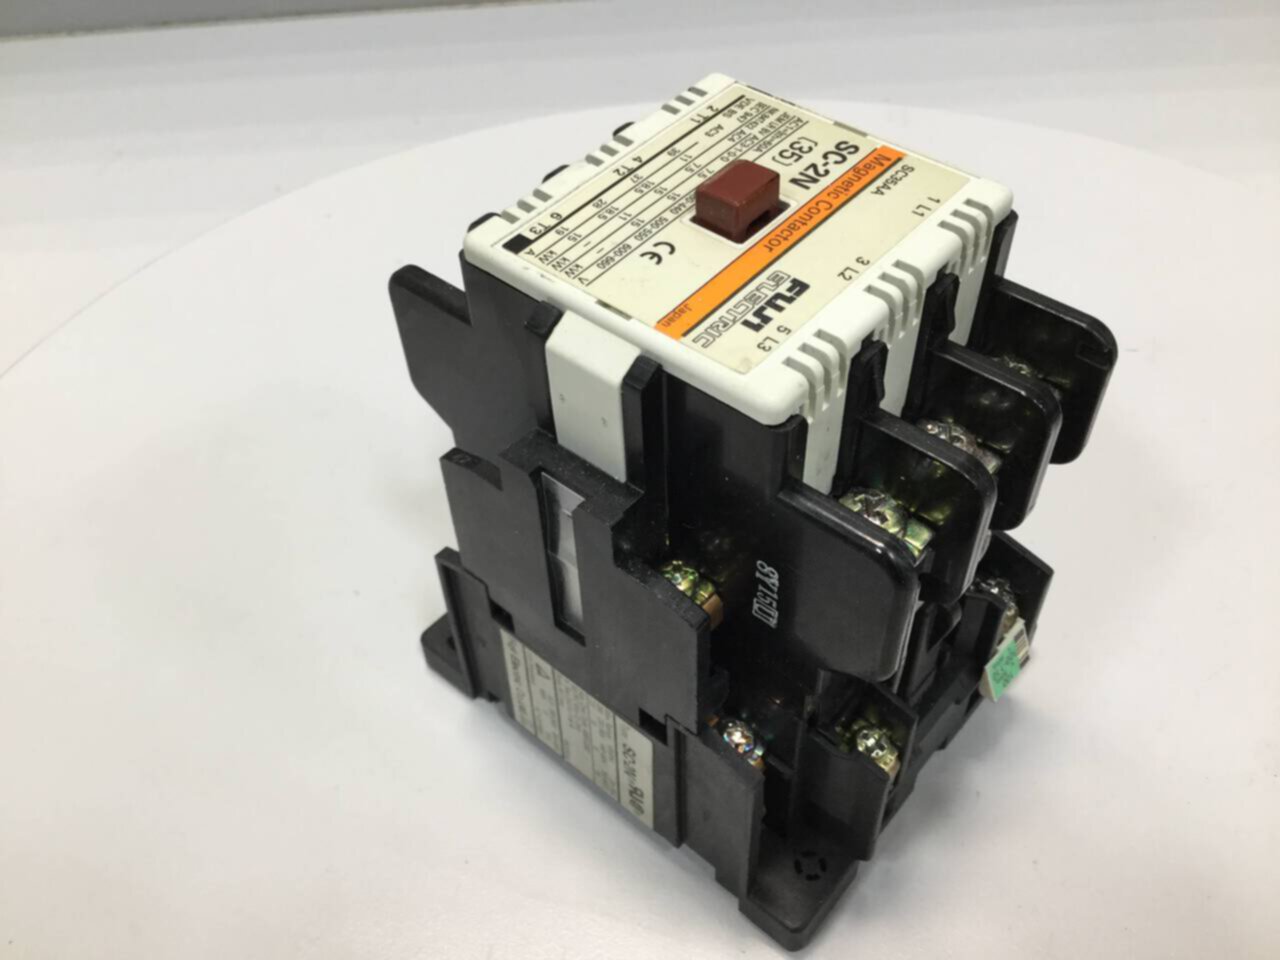 FUJI SC-2N  MAGNETIC CONTACTOR 100V TR2N OVERLOAD RELAY  #S835